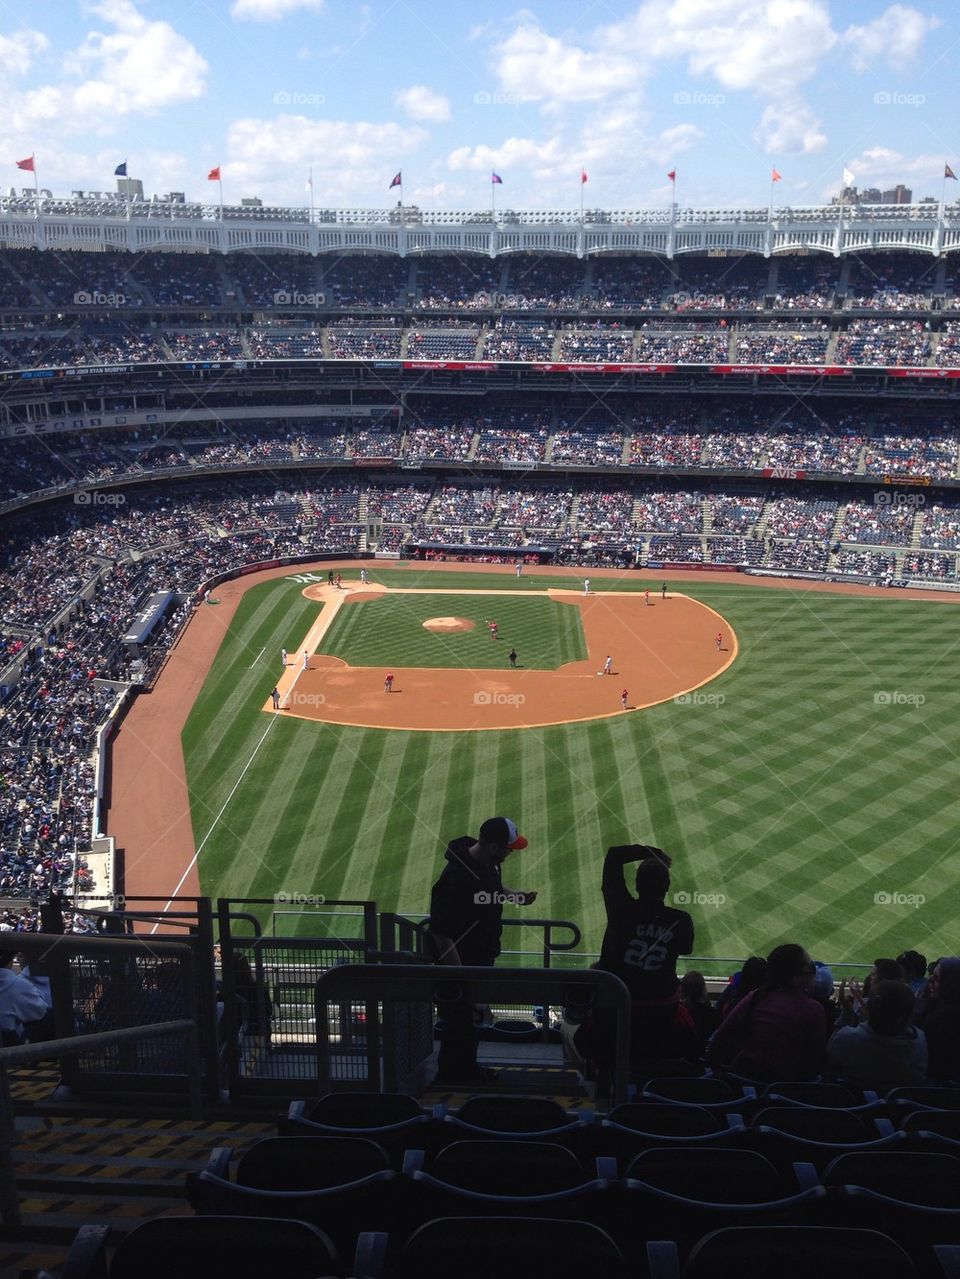 Take me out to the ballgame. A Yankees game in the nosebleeds.